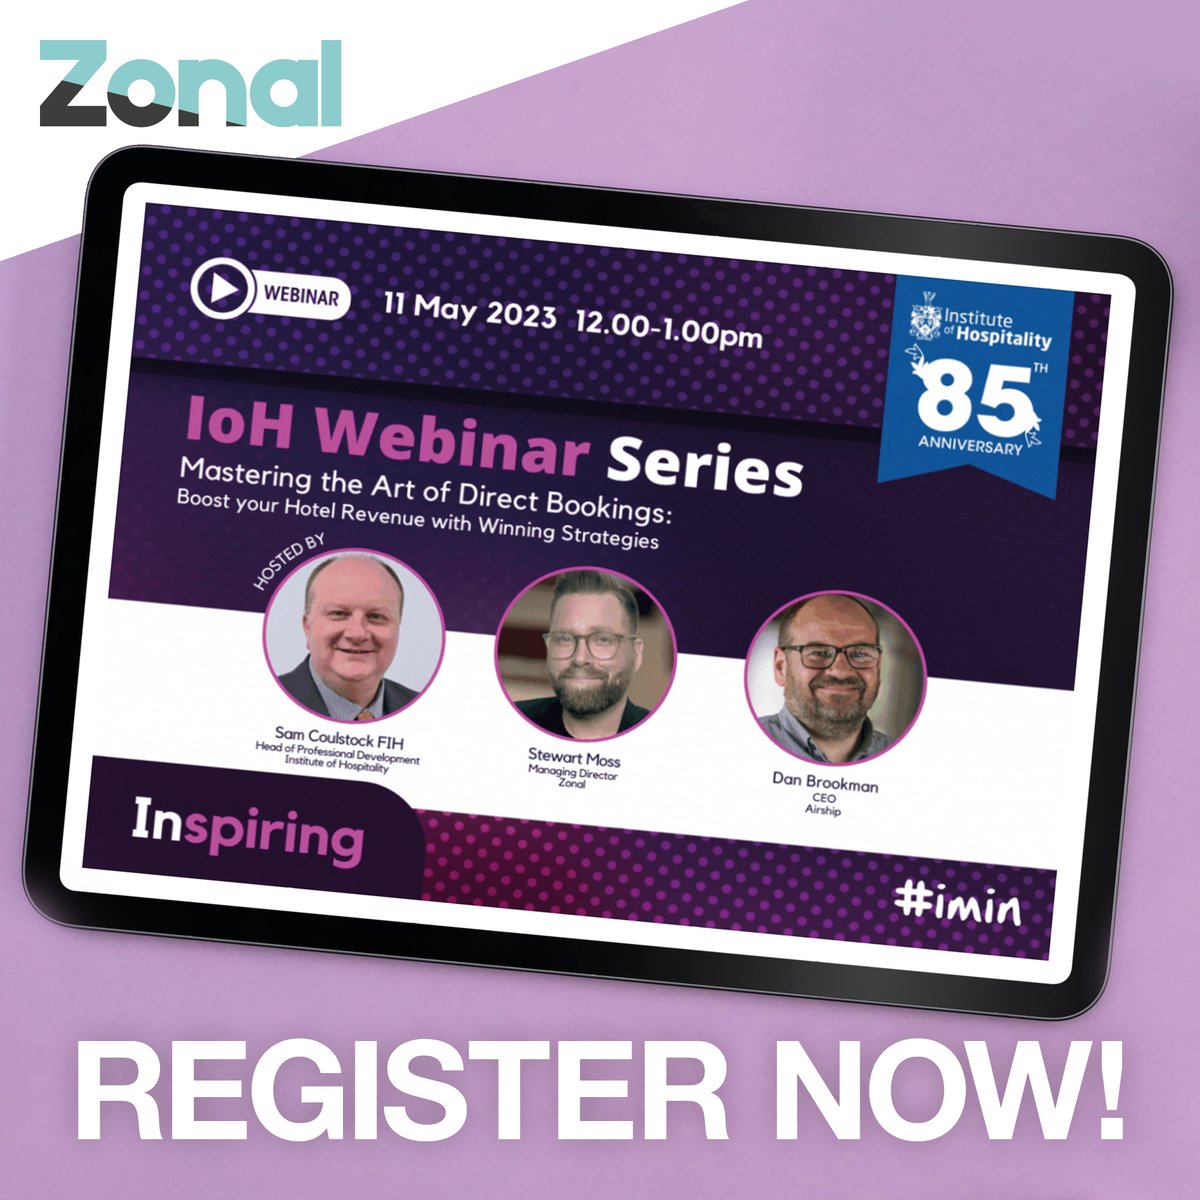 💻 Mastering the Art of #DirectBooking: Boost your hotel revenue with winning strategies - our new webinar with the @IoH_Online 

🗓️ 11 May 2023 
⏱️ 12:00 pm - 1:00 pm

➡️ Register now: instituteofhospitality.org/event/boost-yo…

#ZonalUK #HotelTech @danbrookman @AirshipTeam @HiLevelSoftware